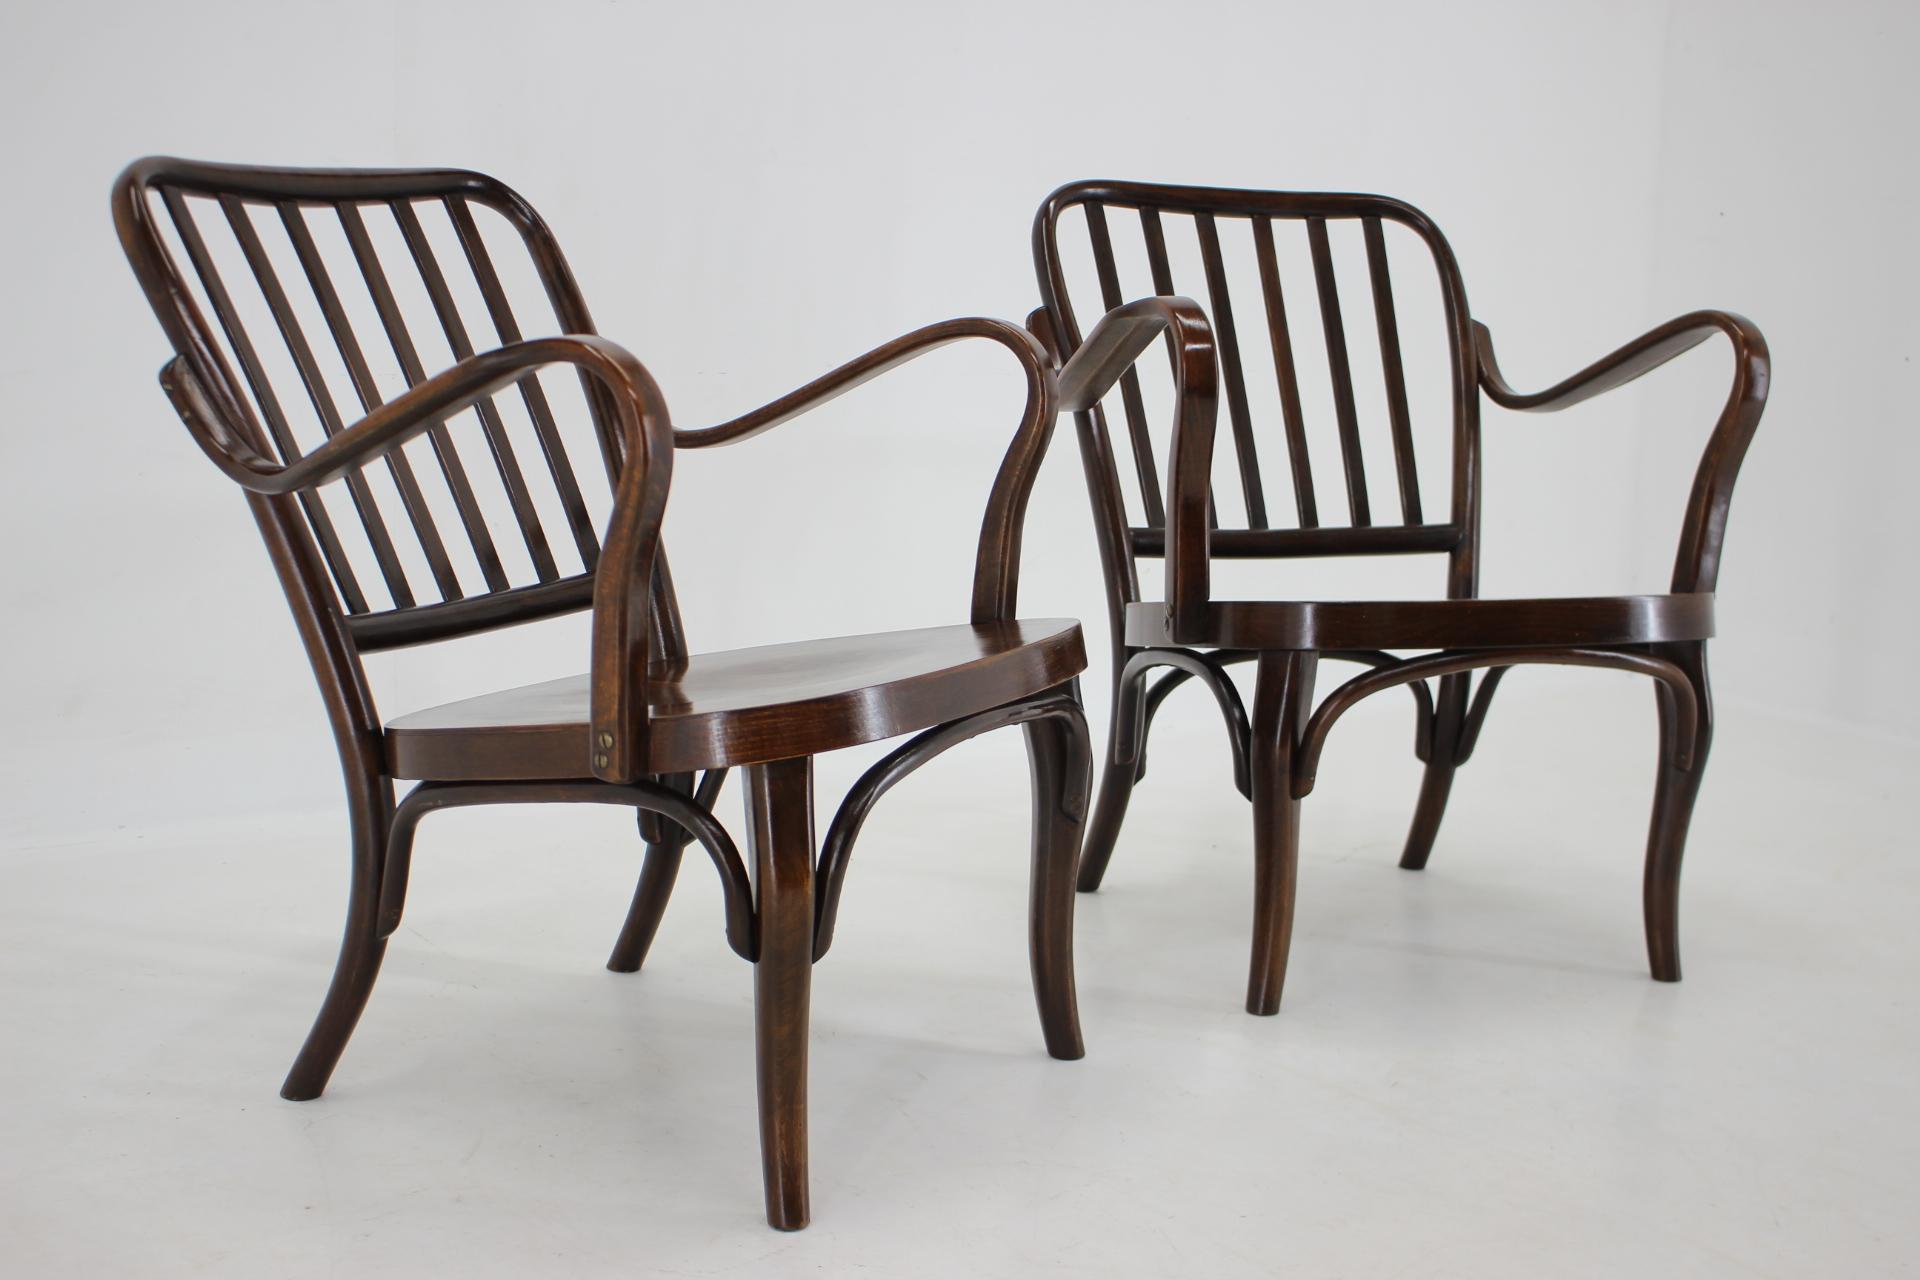 1950s Pair of Josef Frank Bentwood Armchairs no. 752 by Thon In Good Condition For Sale In Praha, CZ